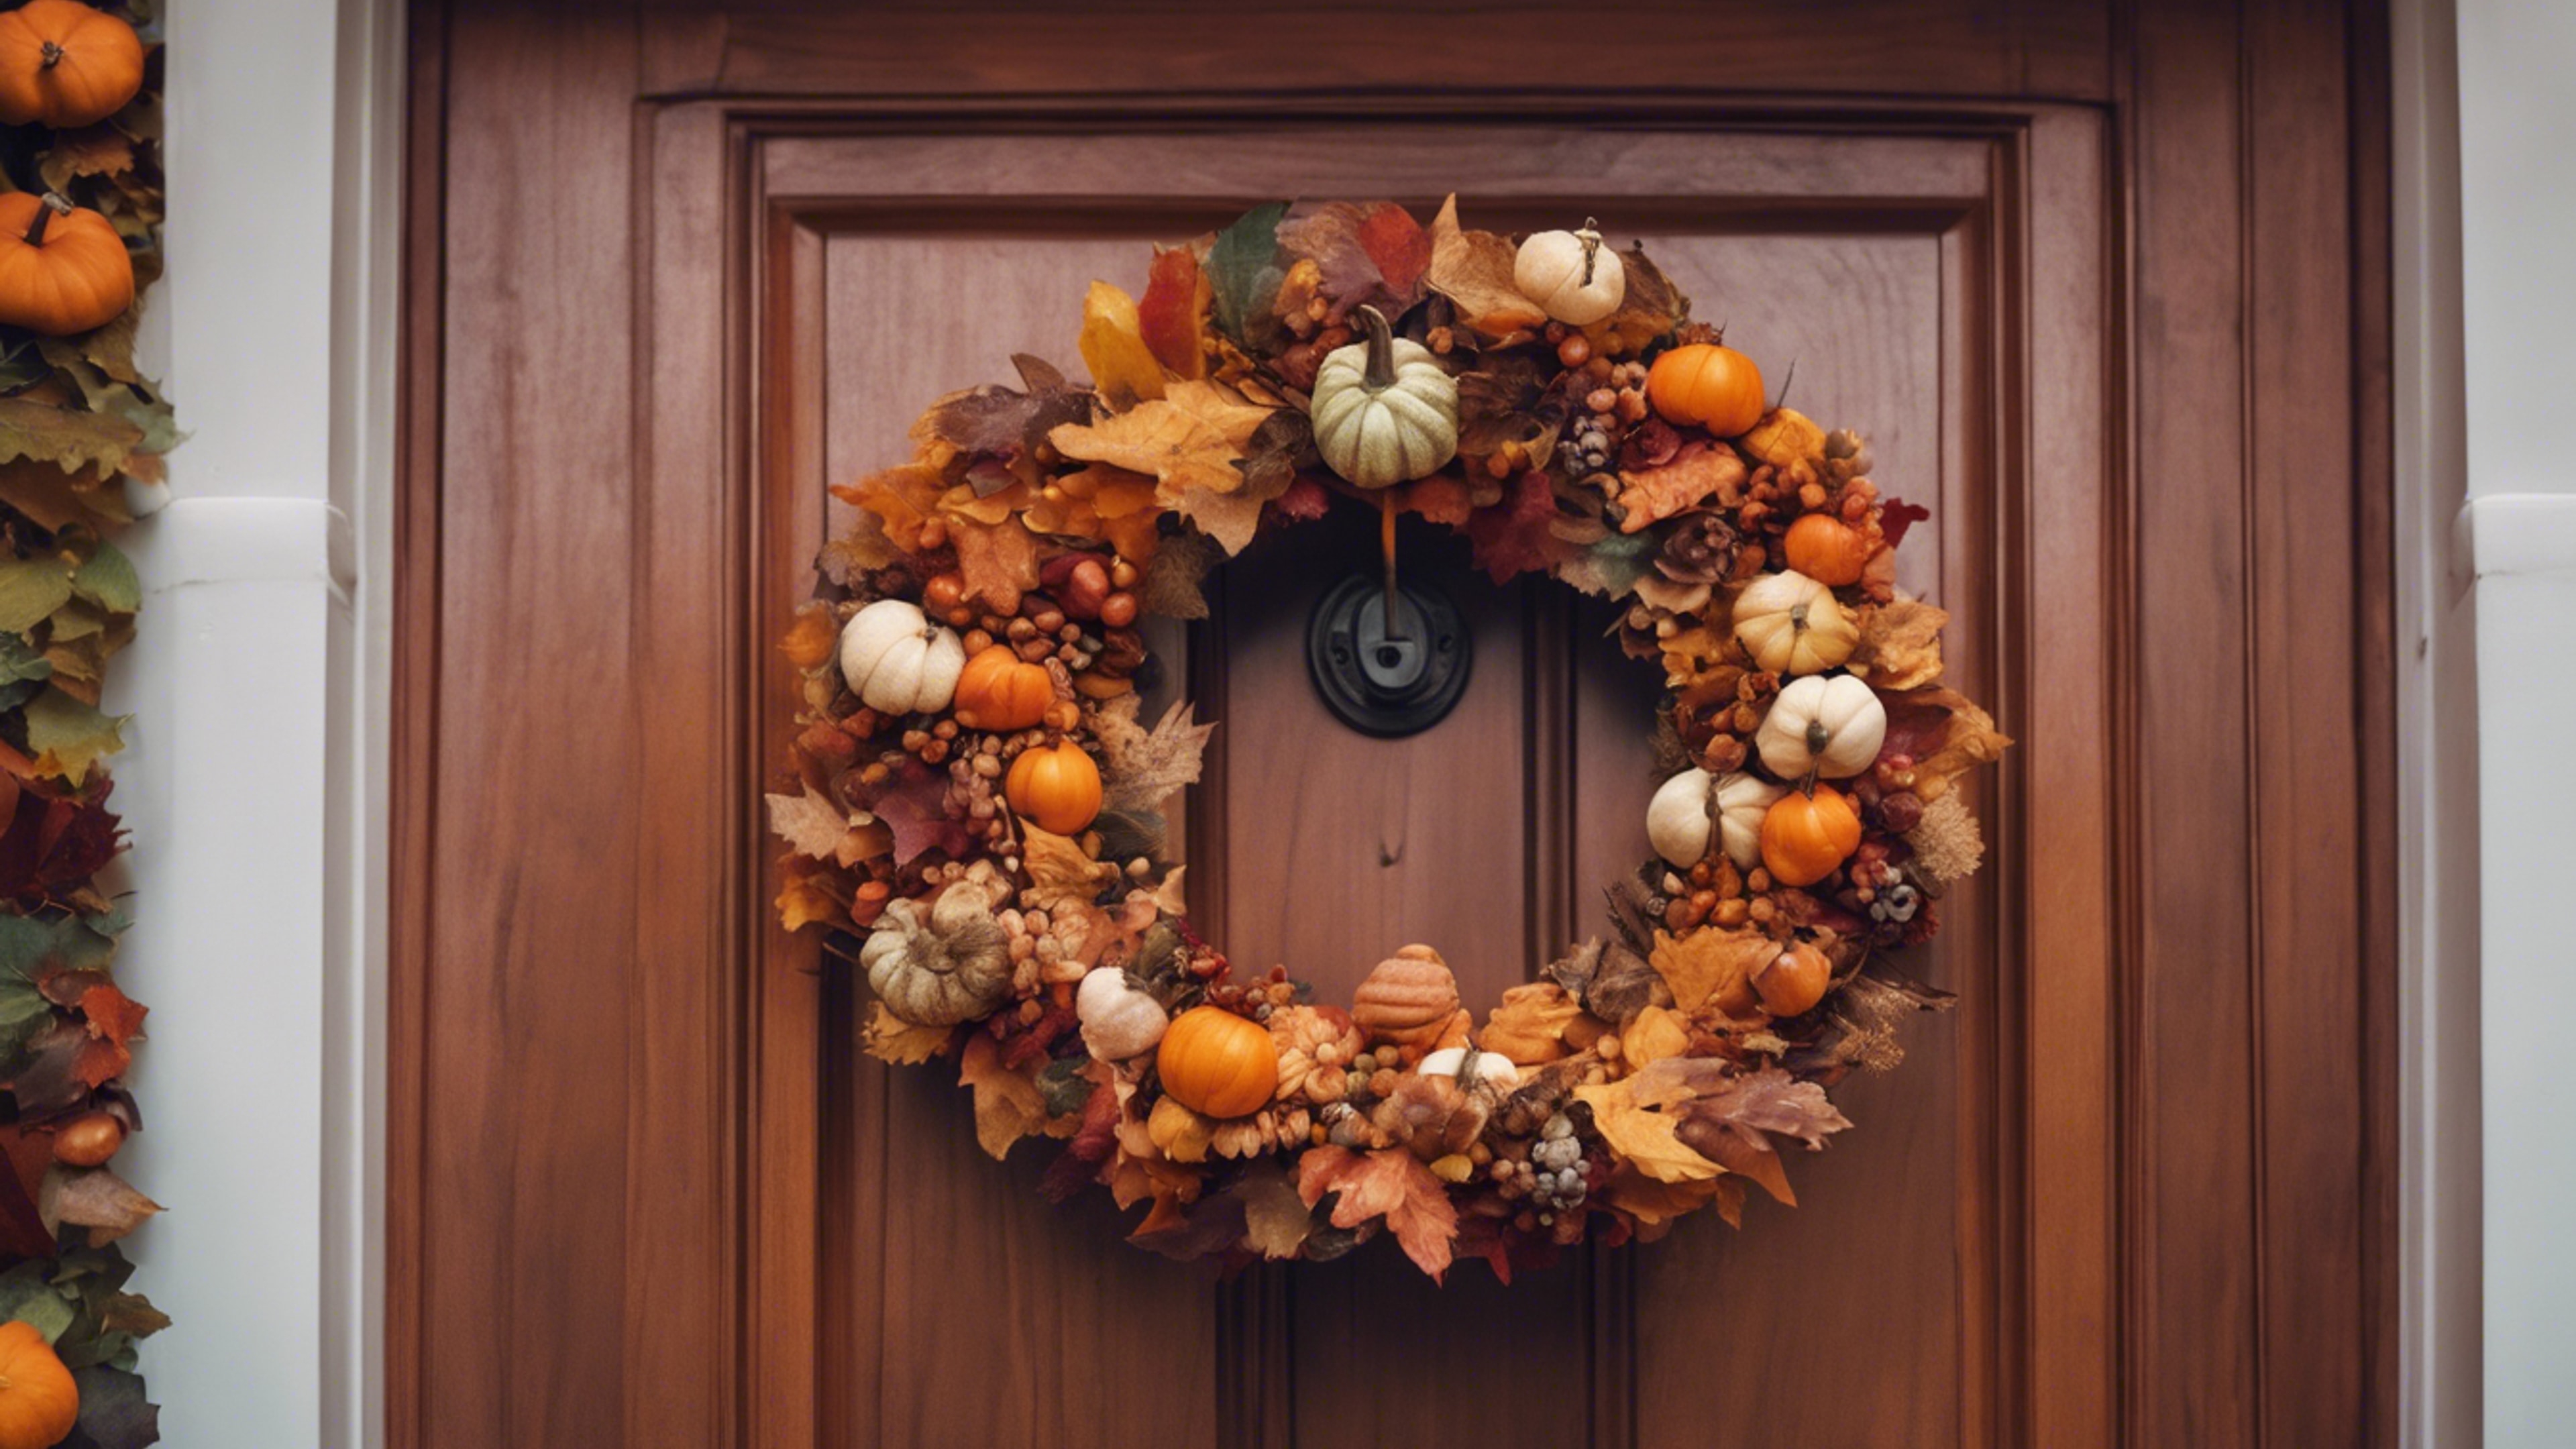 A festive autumn wreath made of colorful fall leaves and miniature pumpkins hanging elegantly on a mahogany door, signaling the start of the Thanksgiving holiday. Wallpaper[f1a39b05ecd5476686a3]